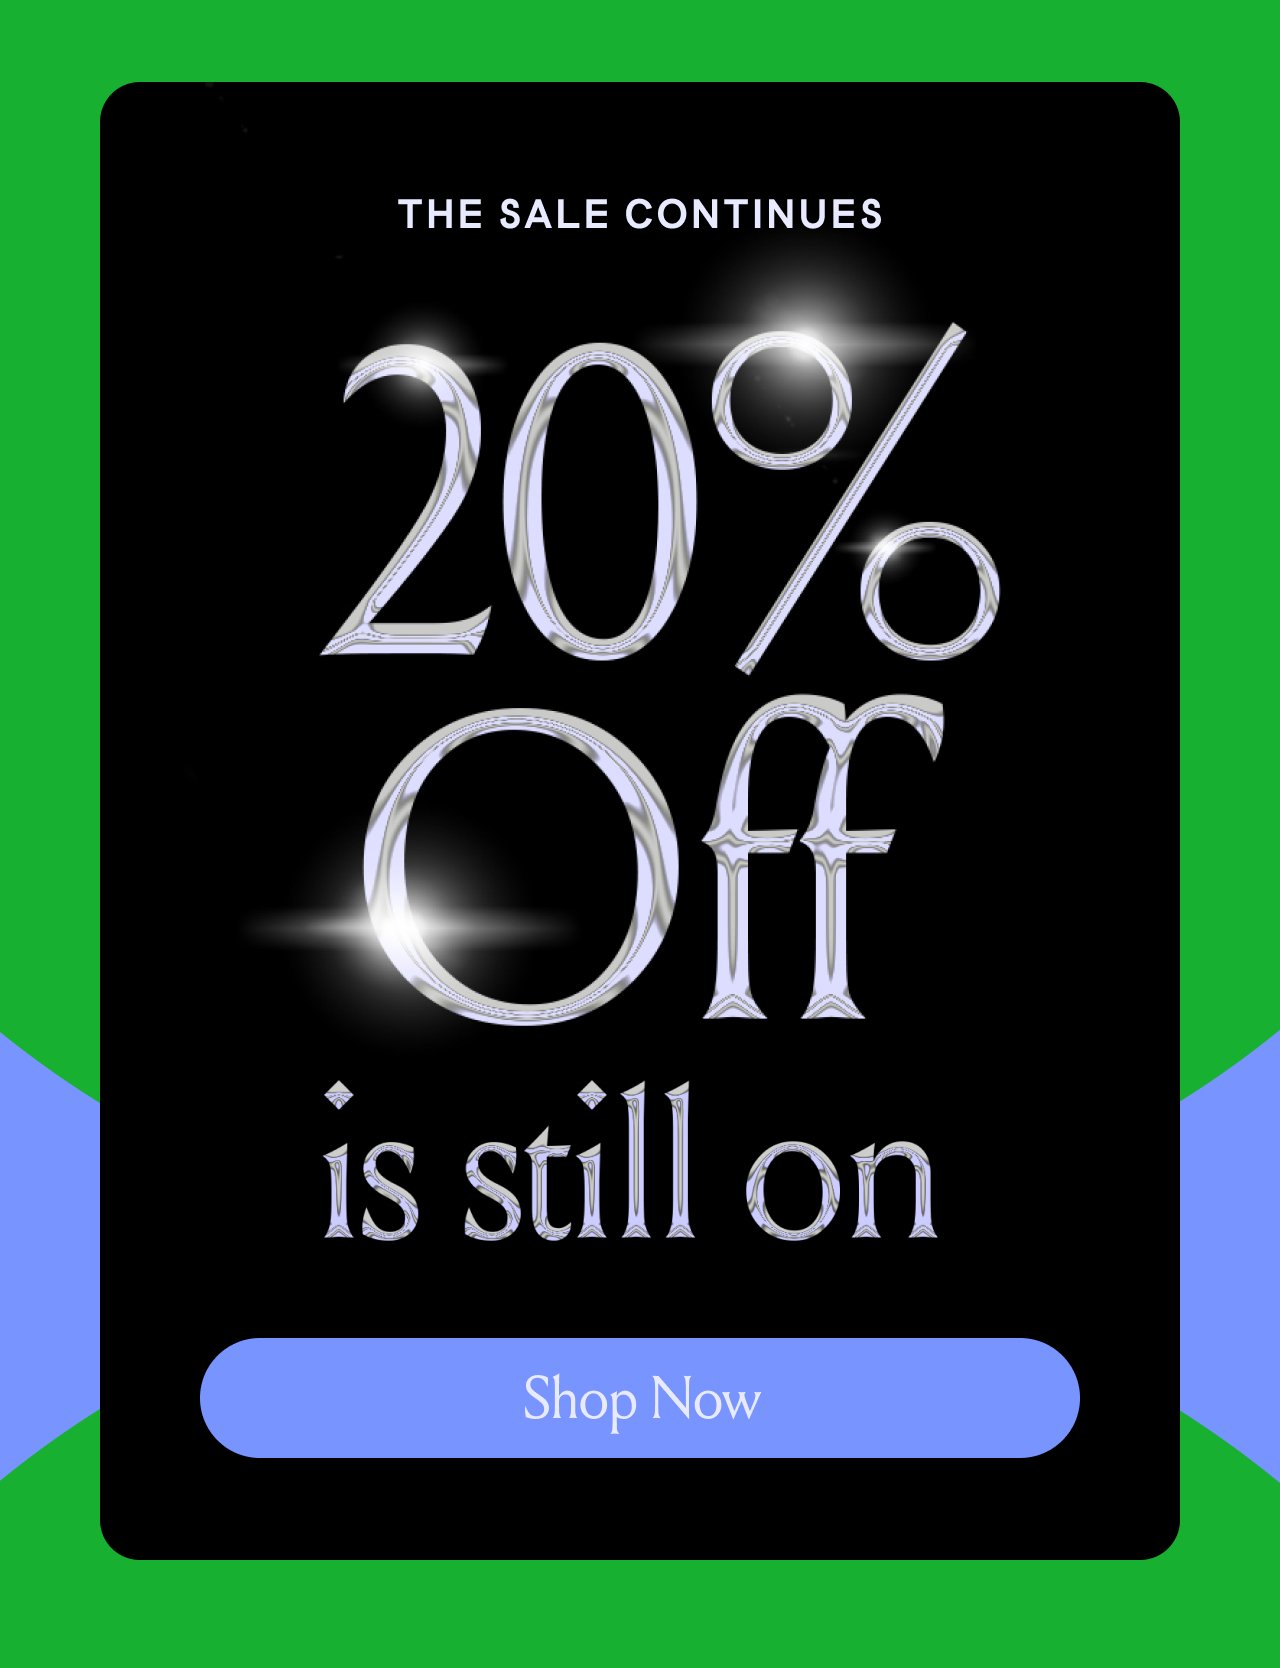 The sale continues! 20% OFF IS STILL ON! Shop Now